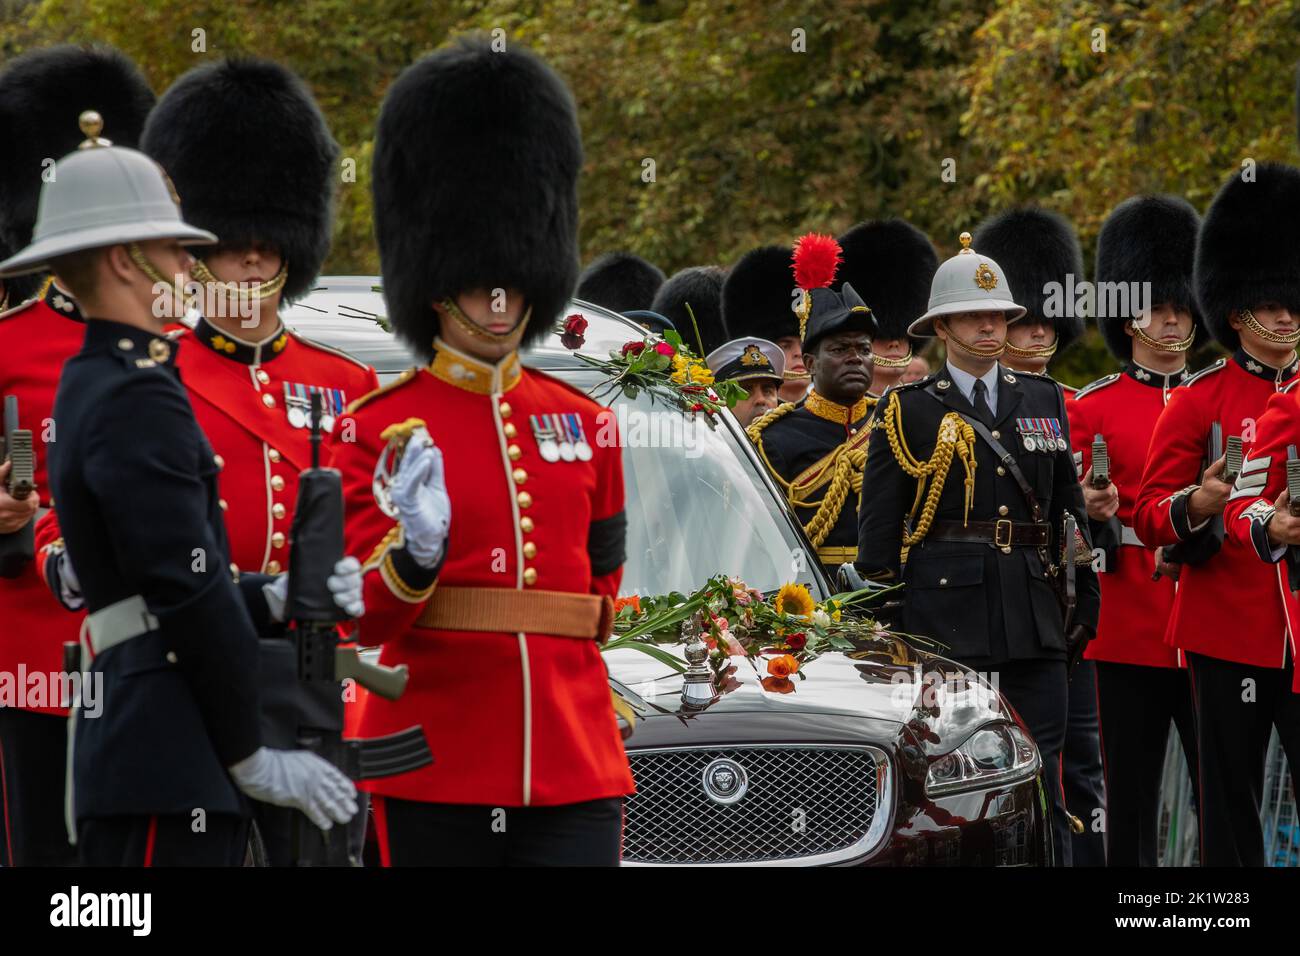 Windsor, UK. 19th September, 2022. Grenadier Guards escort Queen Elizabeth II's coffin lying in the State Hearse on the Long Walk in Windsor Great Park during a procession from Shaw Farm Gate to St George’s Chapel for the Committal Service. Queen Elizabeth II, the UK's longest-serving monarch, died at Balmoral aged 96 on 8th September 2022 after a reign lasting 70 years. Credit: Mark Kerrison/Alamy Live News Stock Photo